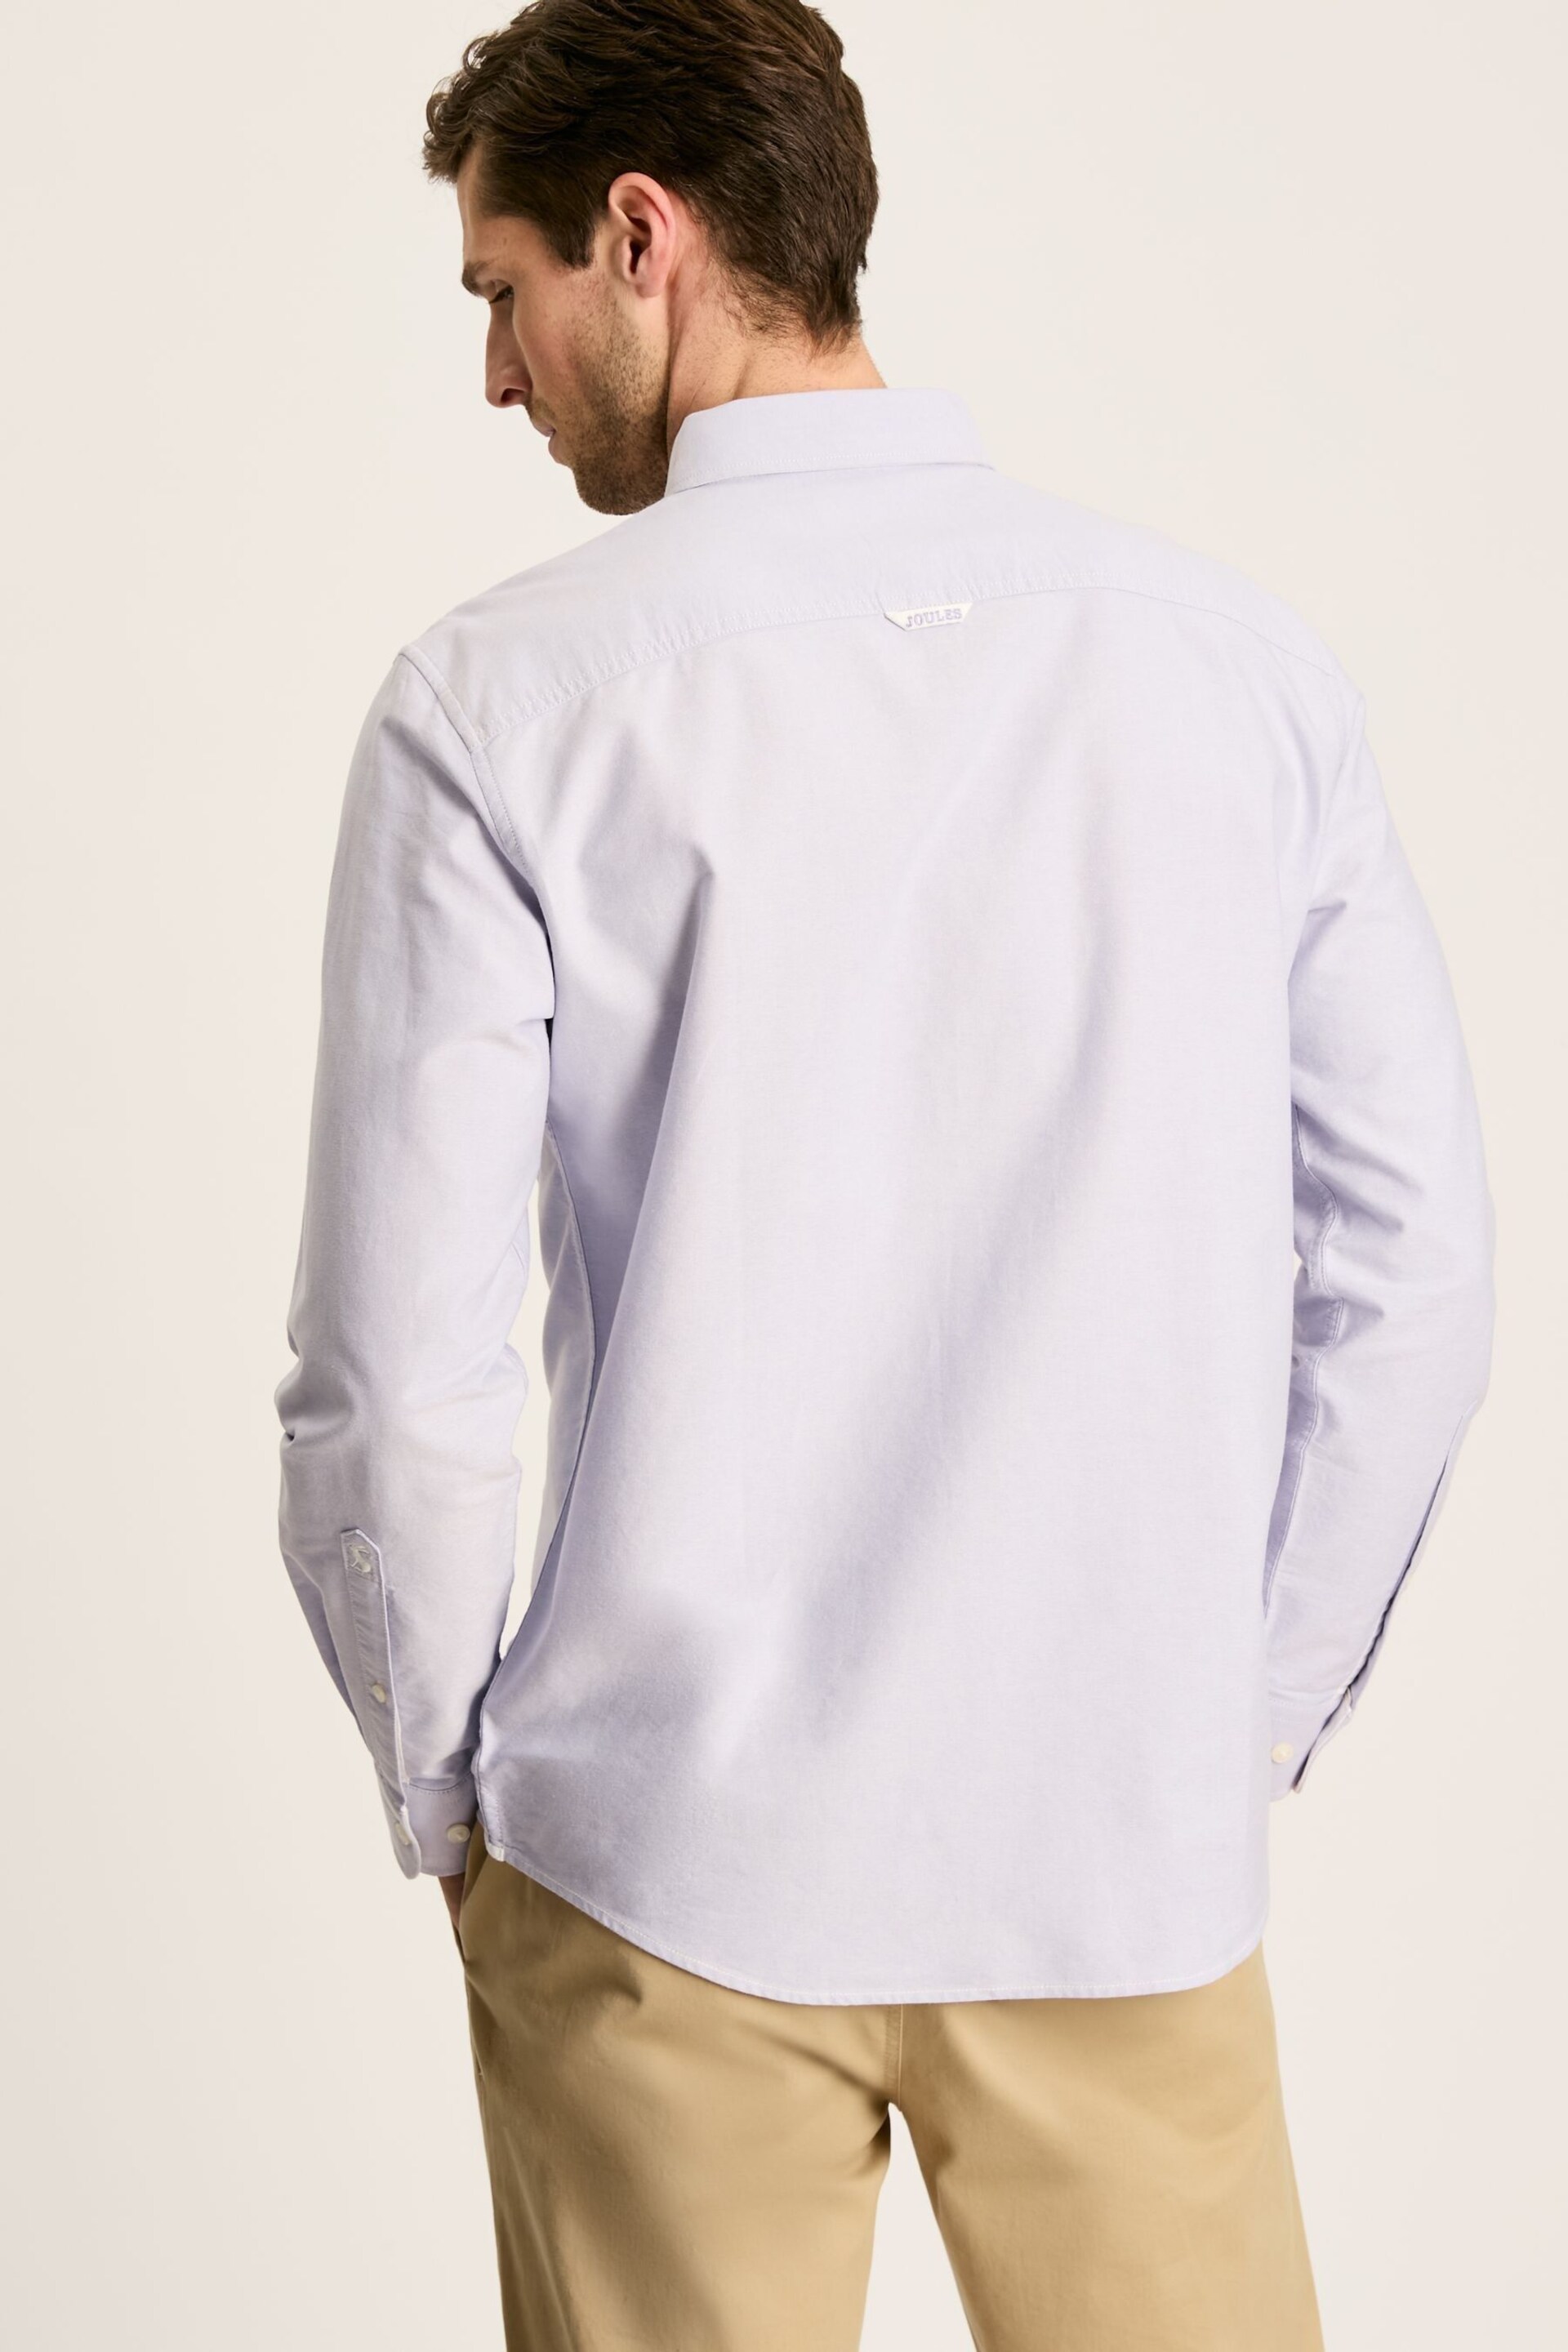 Joules Oxford Purple Classic Fit Shirt - Image 3 of 7